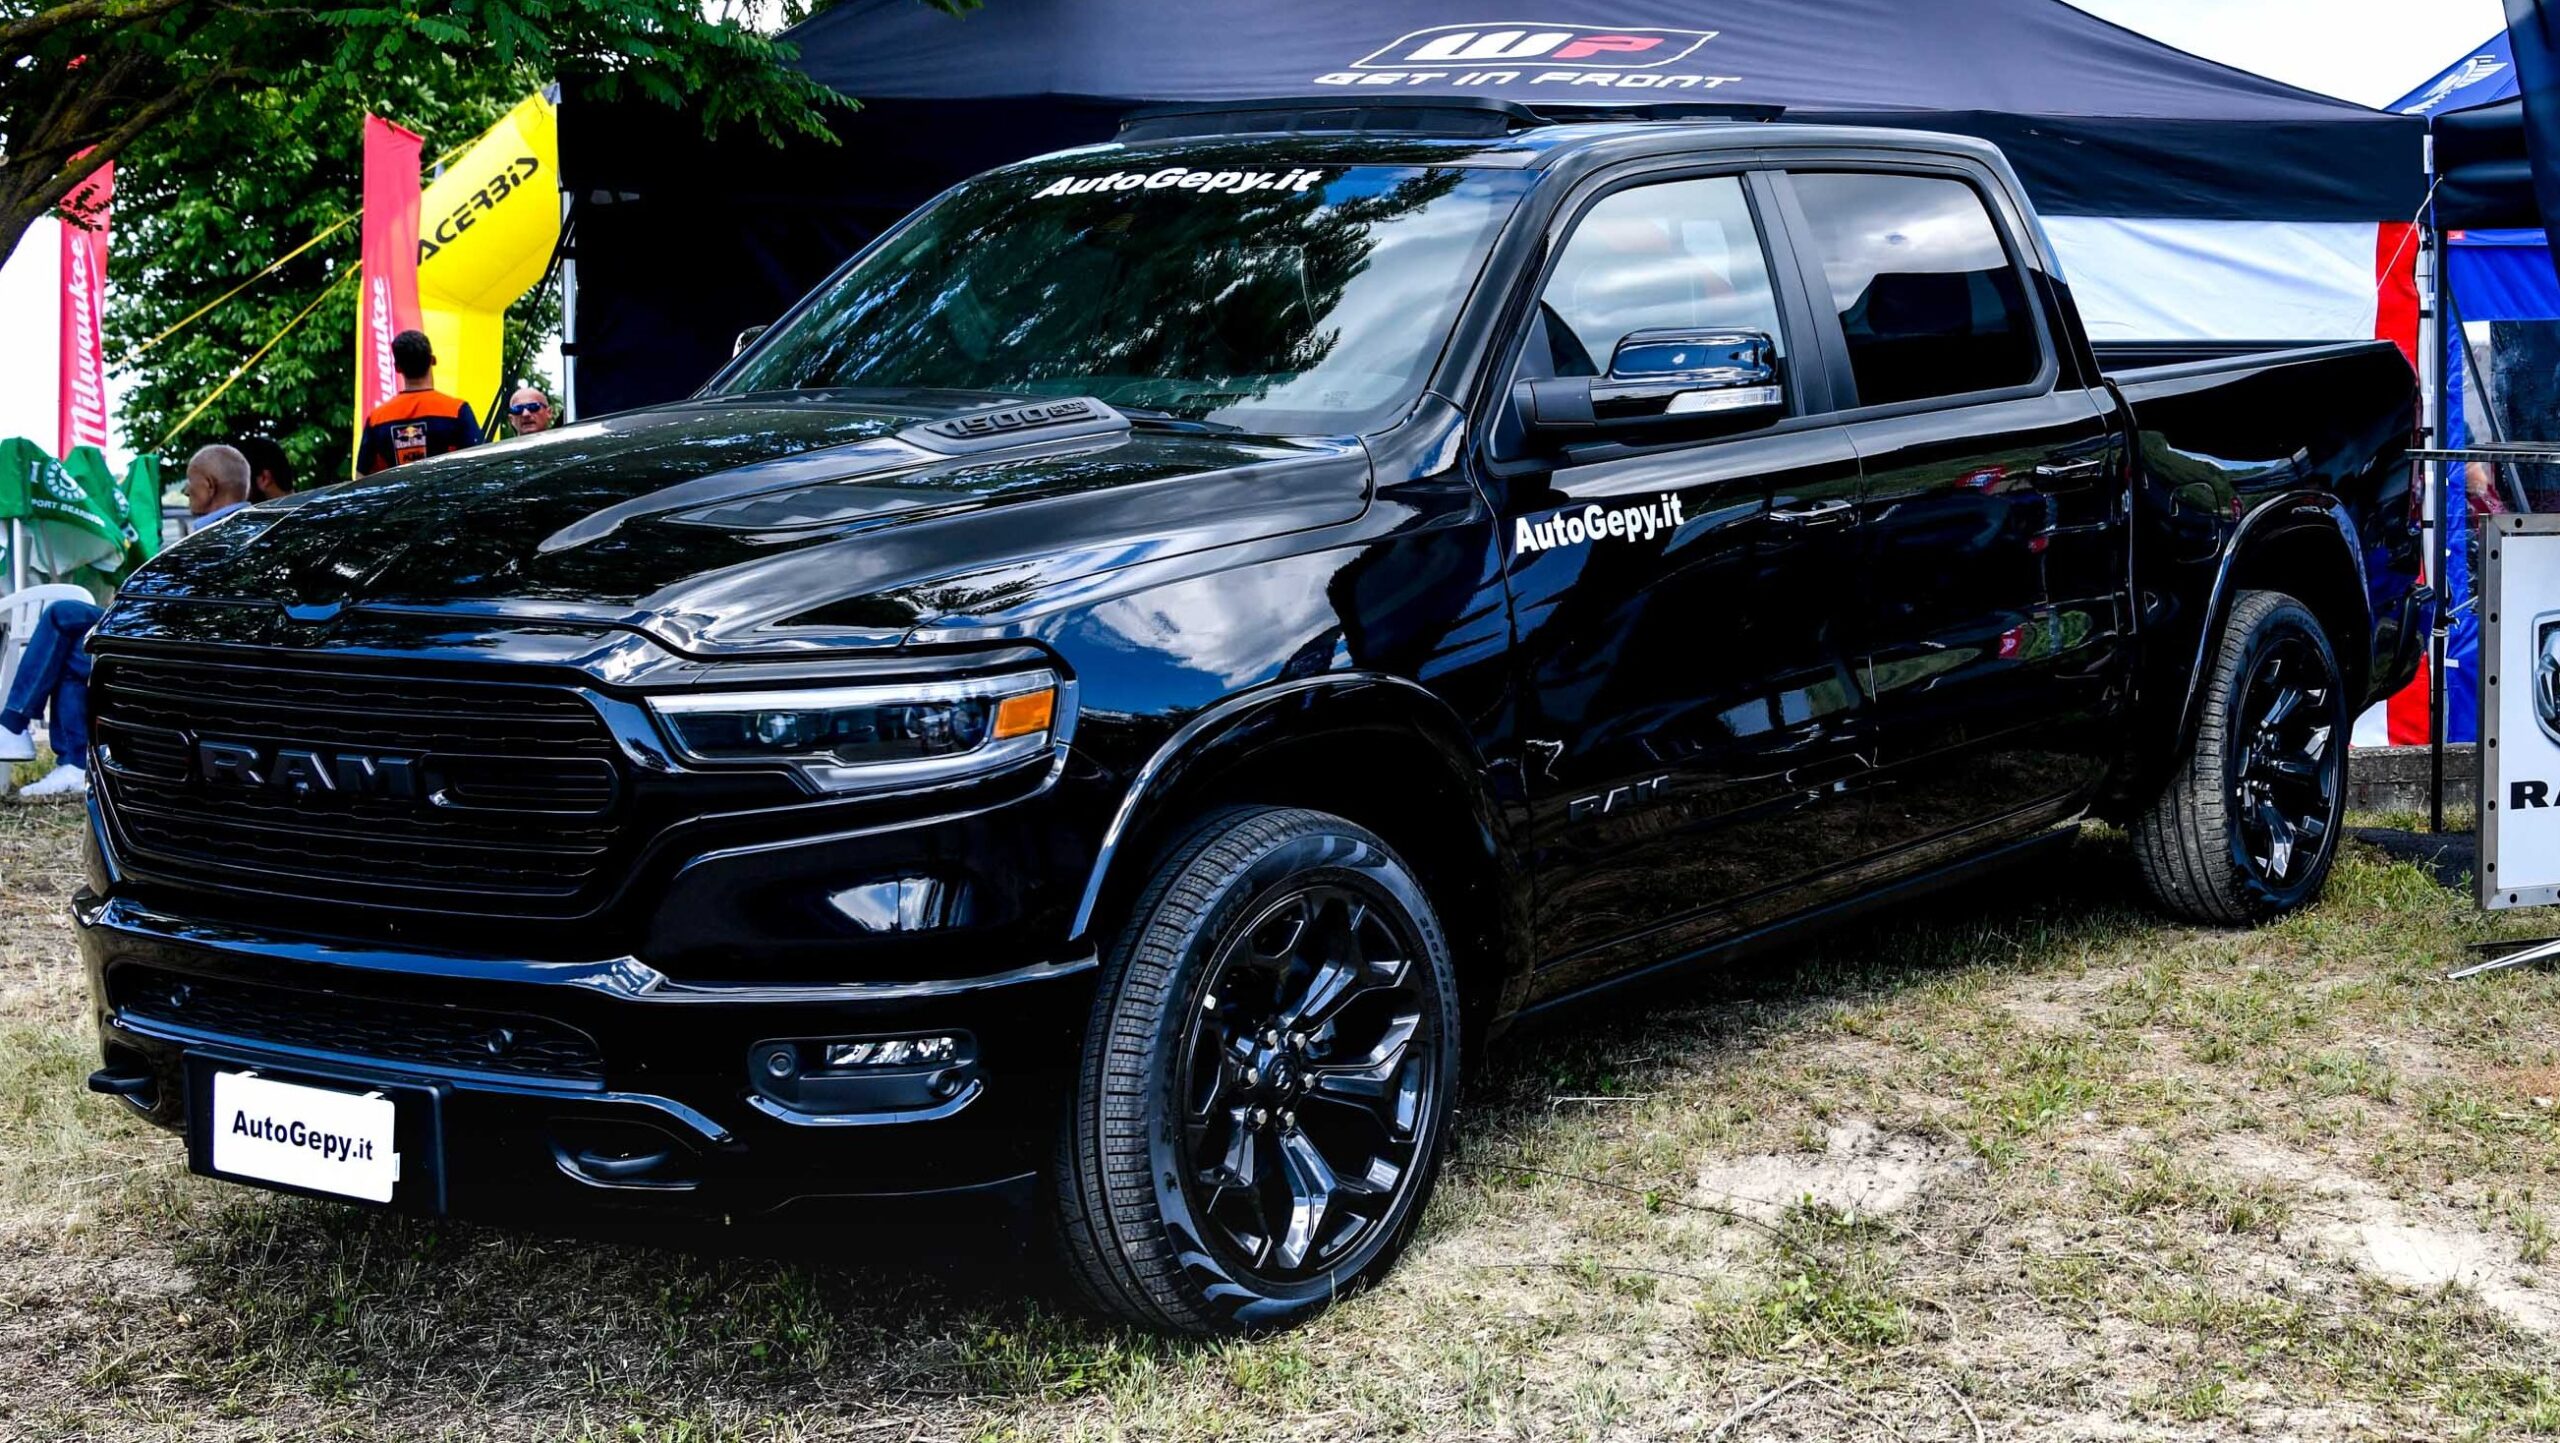 Ram 1500 Limited Night Edition Makes An Appearance At The EnduroGP